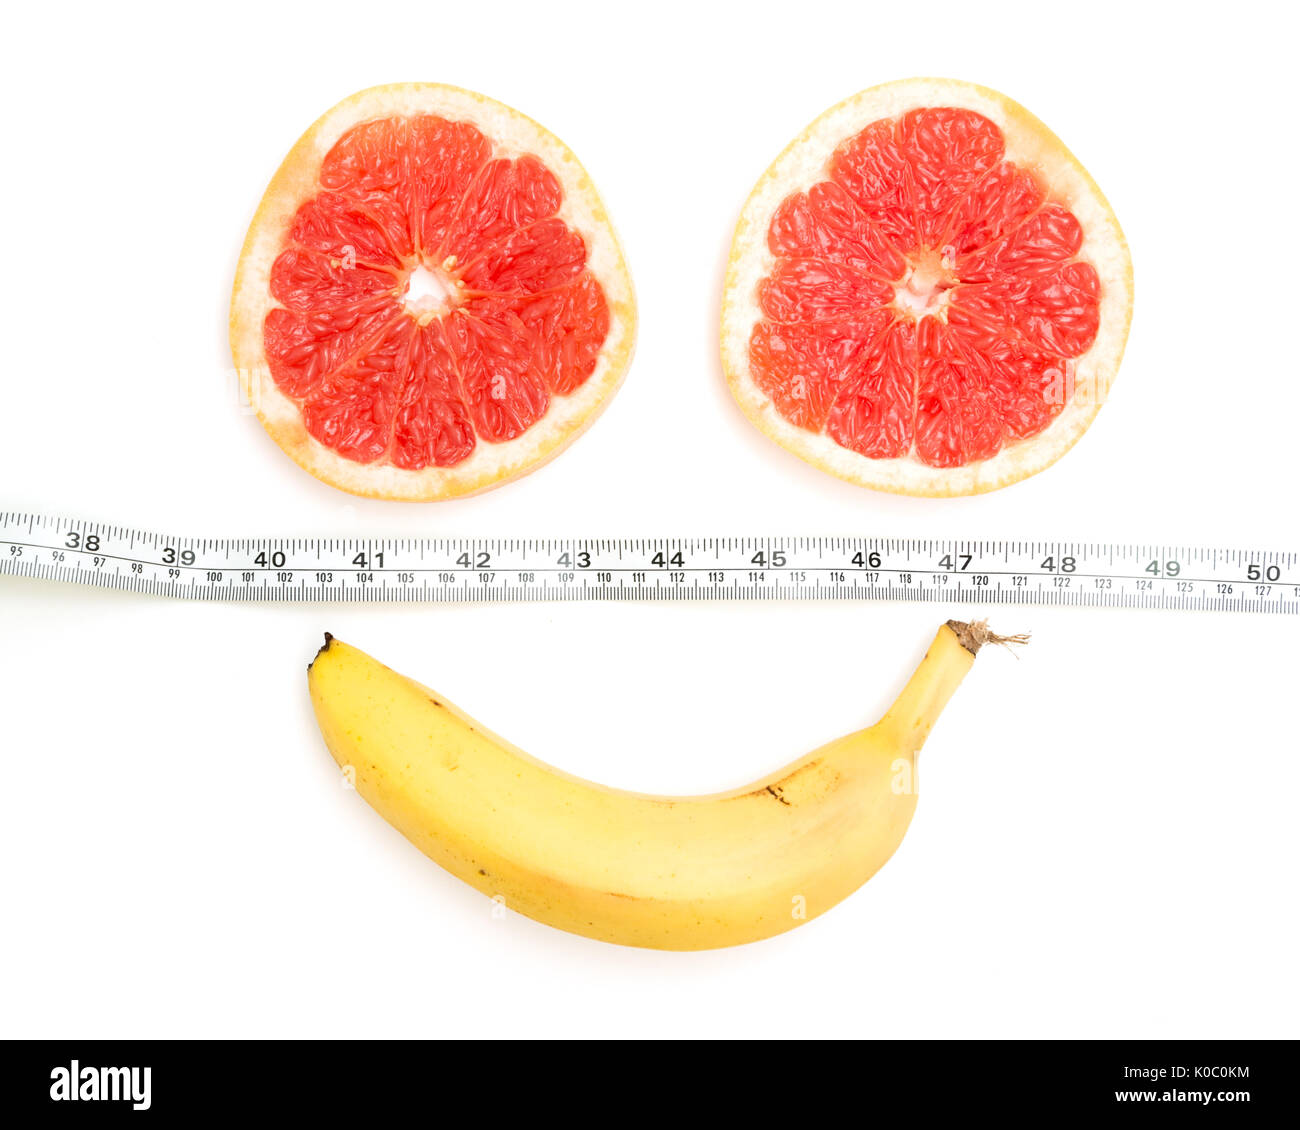 Smiling face made from grapefruit, banana and tape measure,  on white background,Diet concept Stock Photo